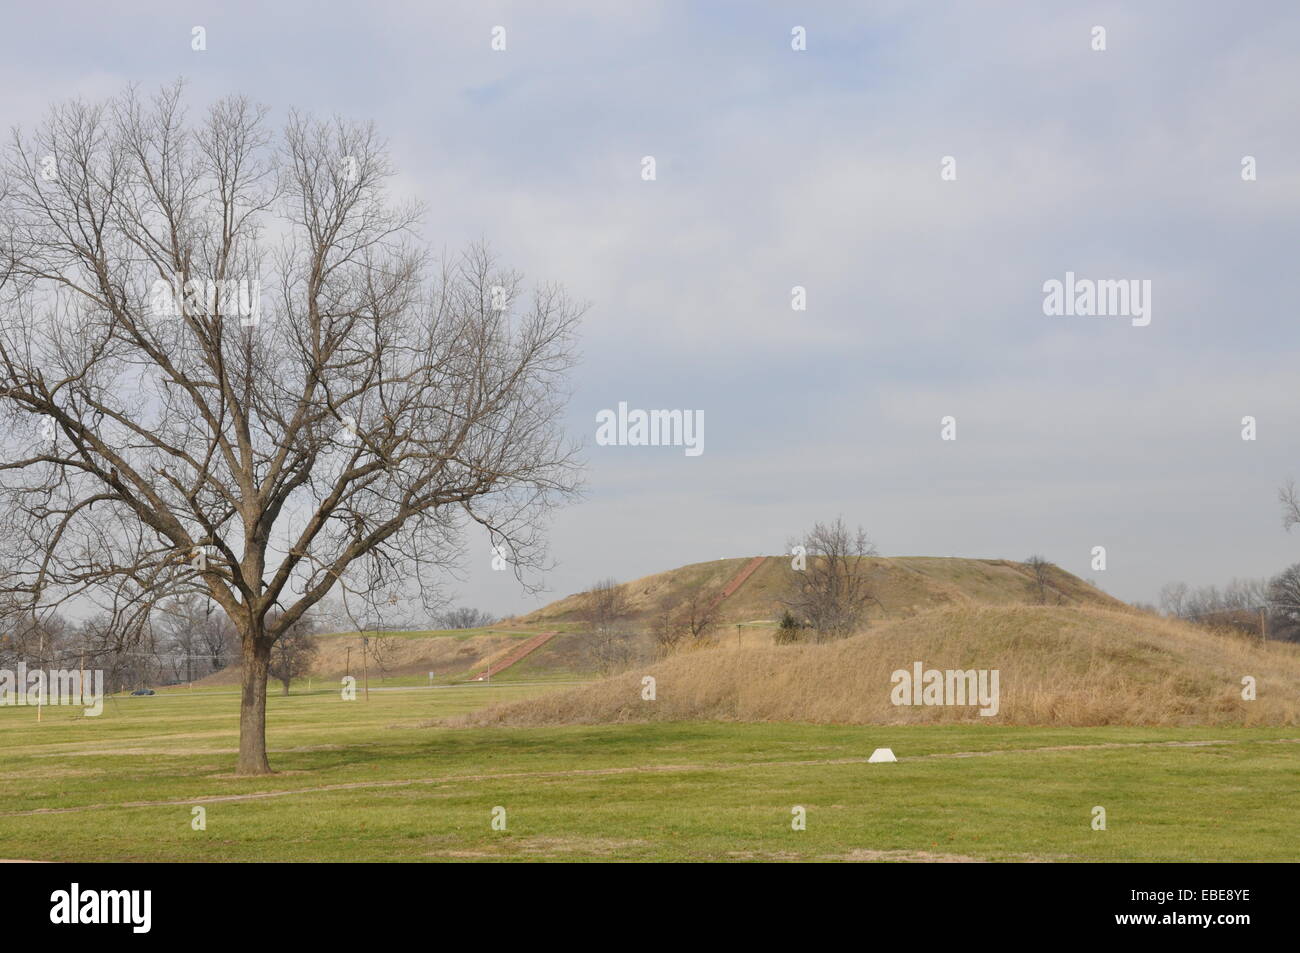 Deciduous tree without its leaves at Cahokia Mounds State Historic Site, Collinsville, Illinois, USA. Stock Photo